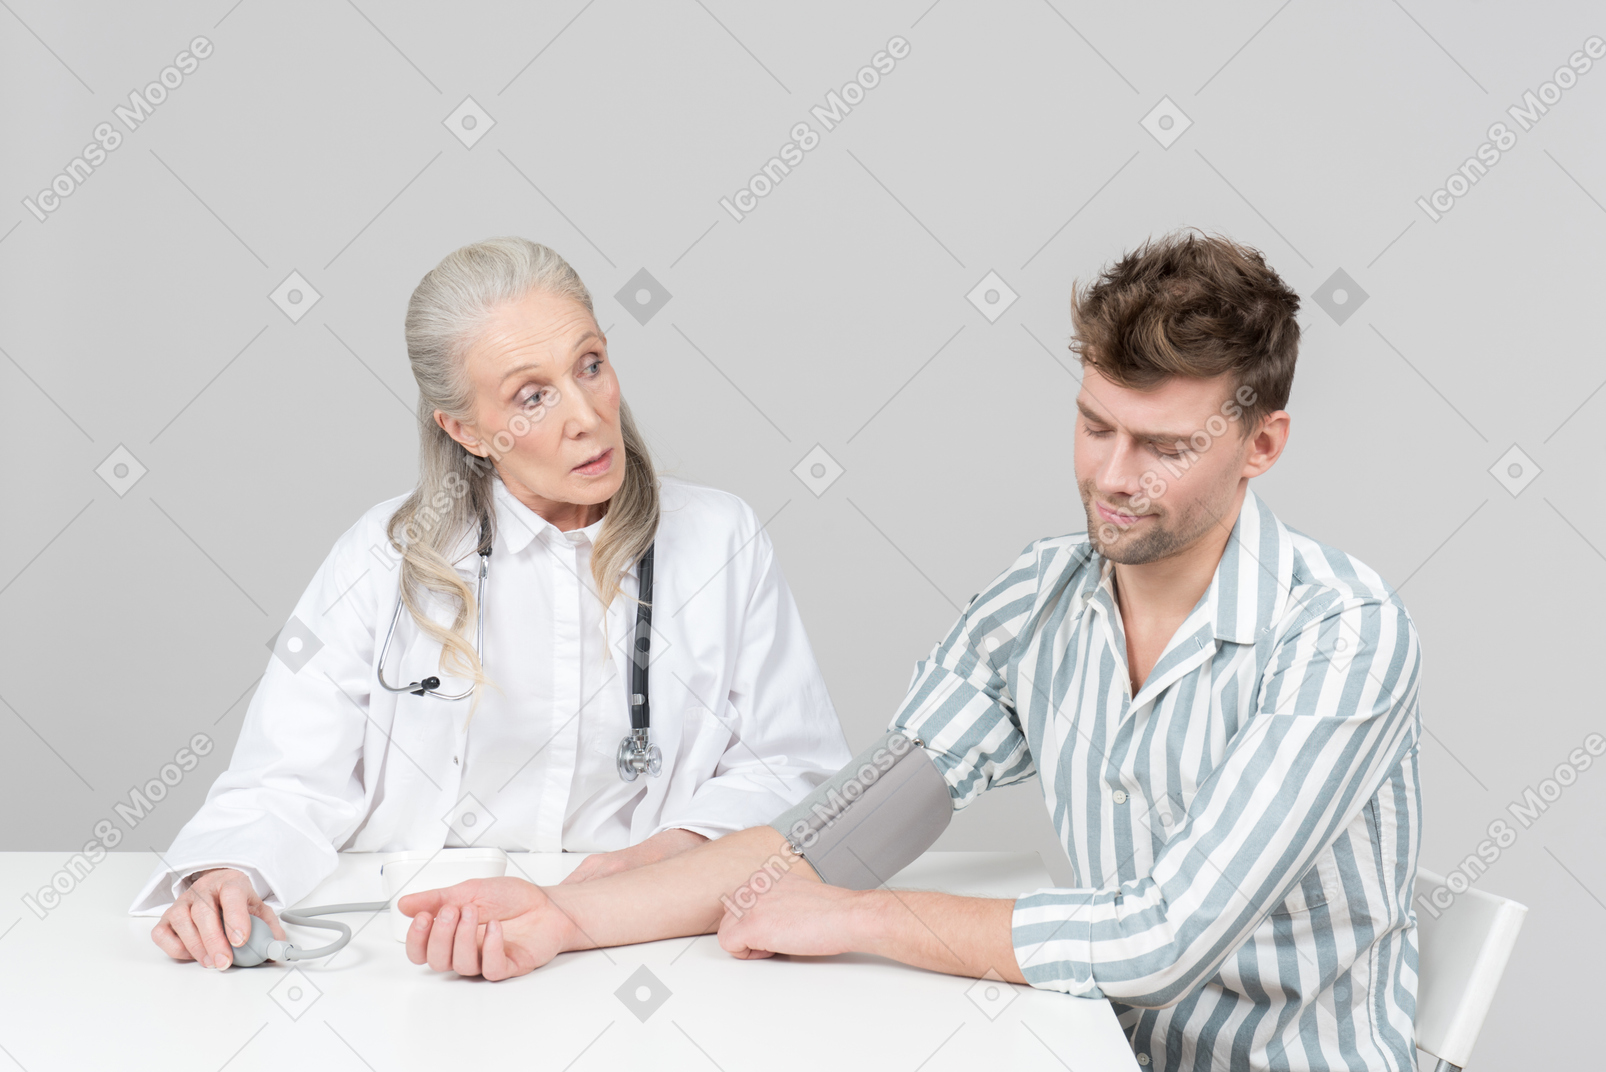 Aged female doctor checking a young man's blood pressure